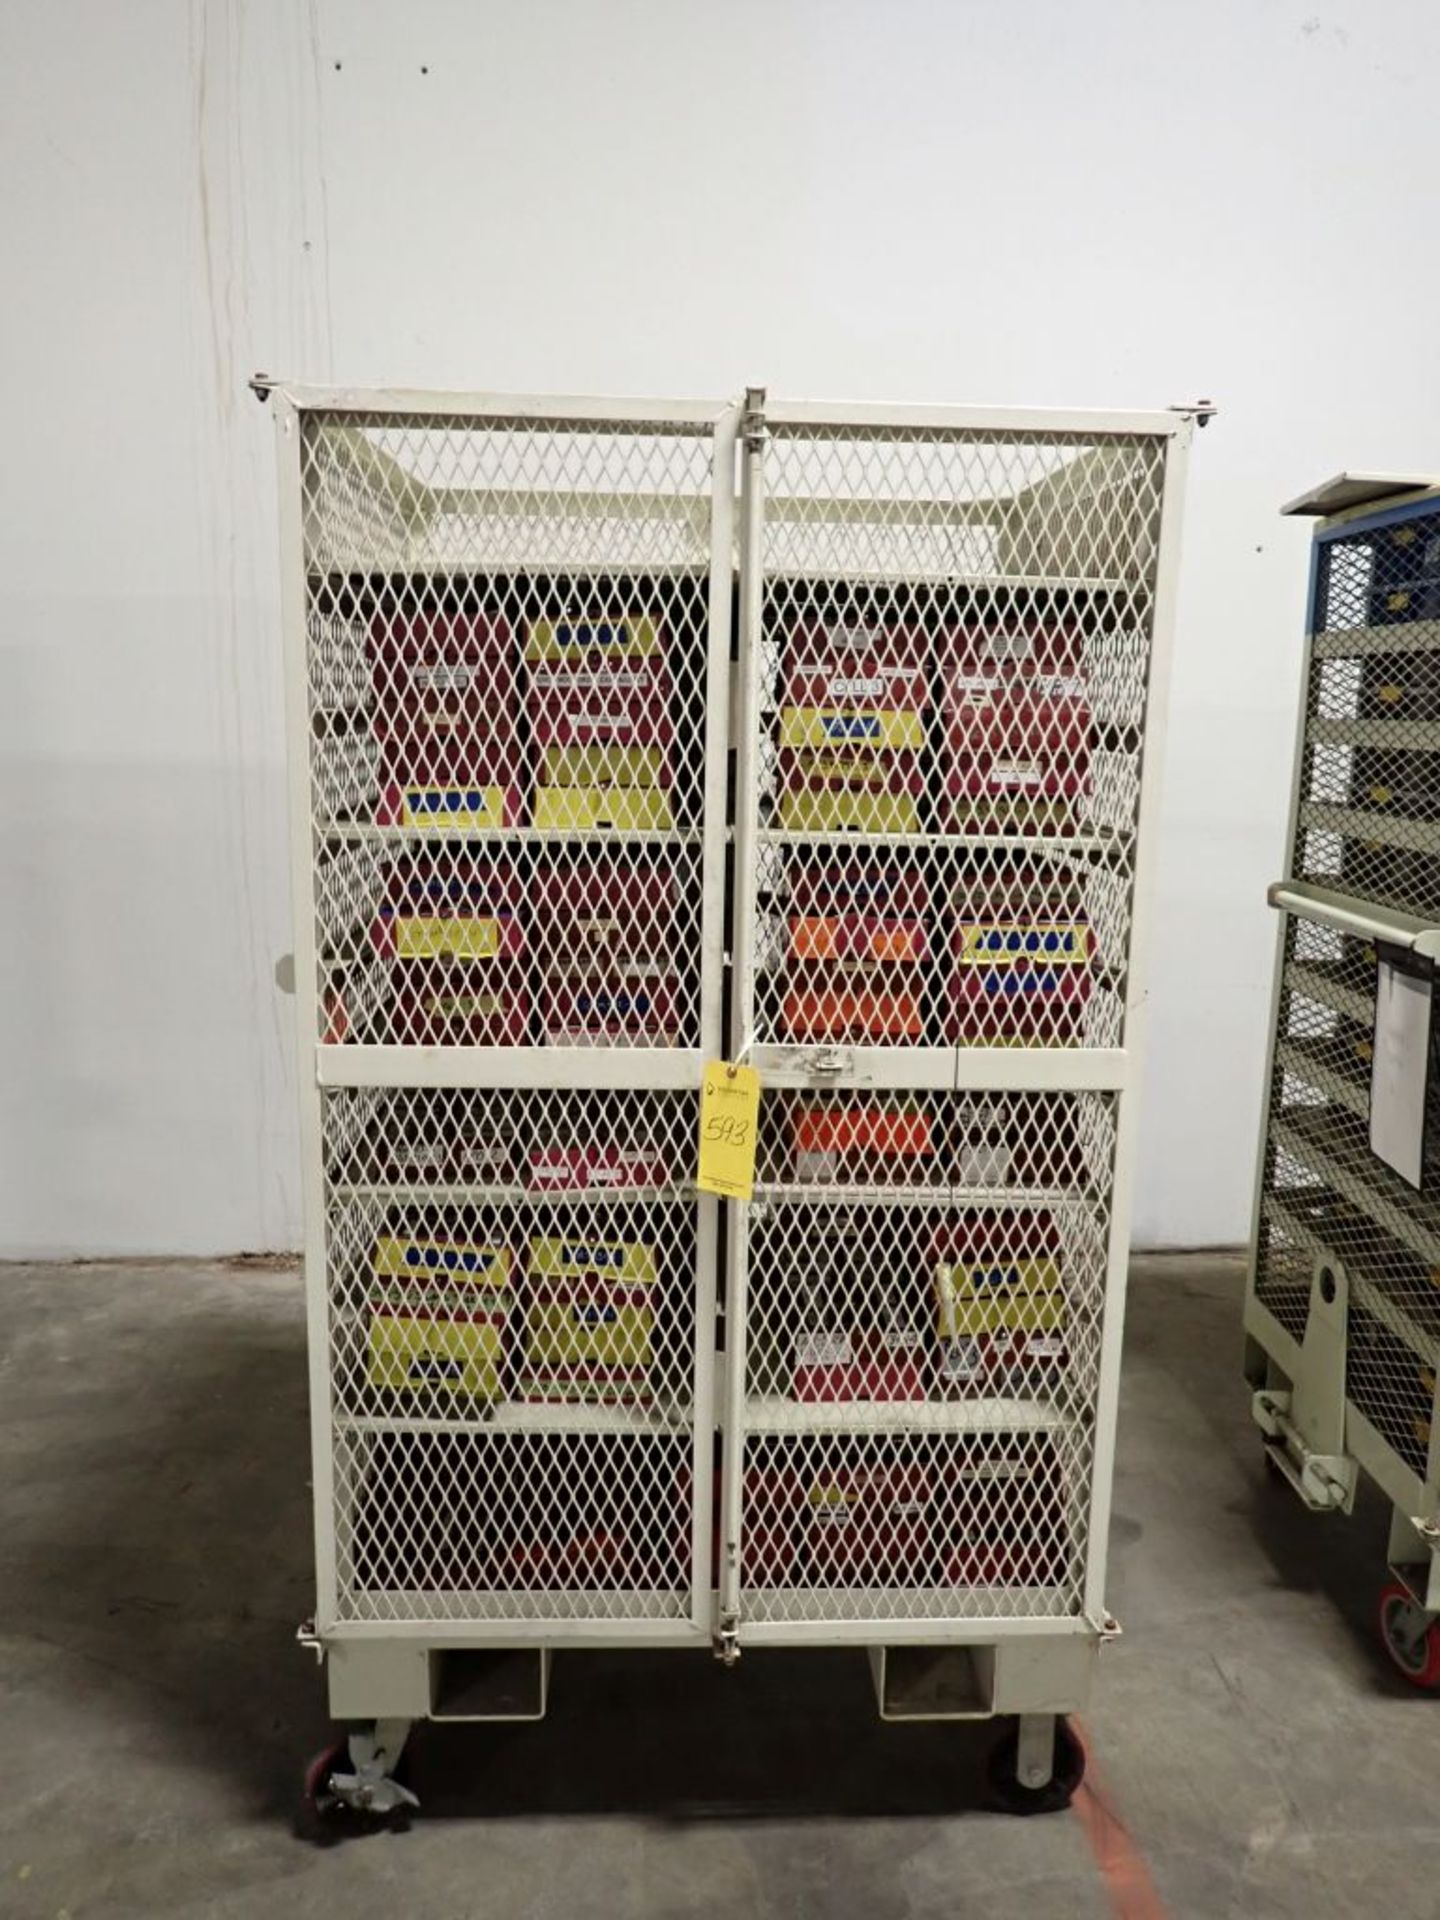 Rolling Locking Cage w/Storage Bins | Tag: 241593 | Limited Forklift Assistance Available - $10.00